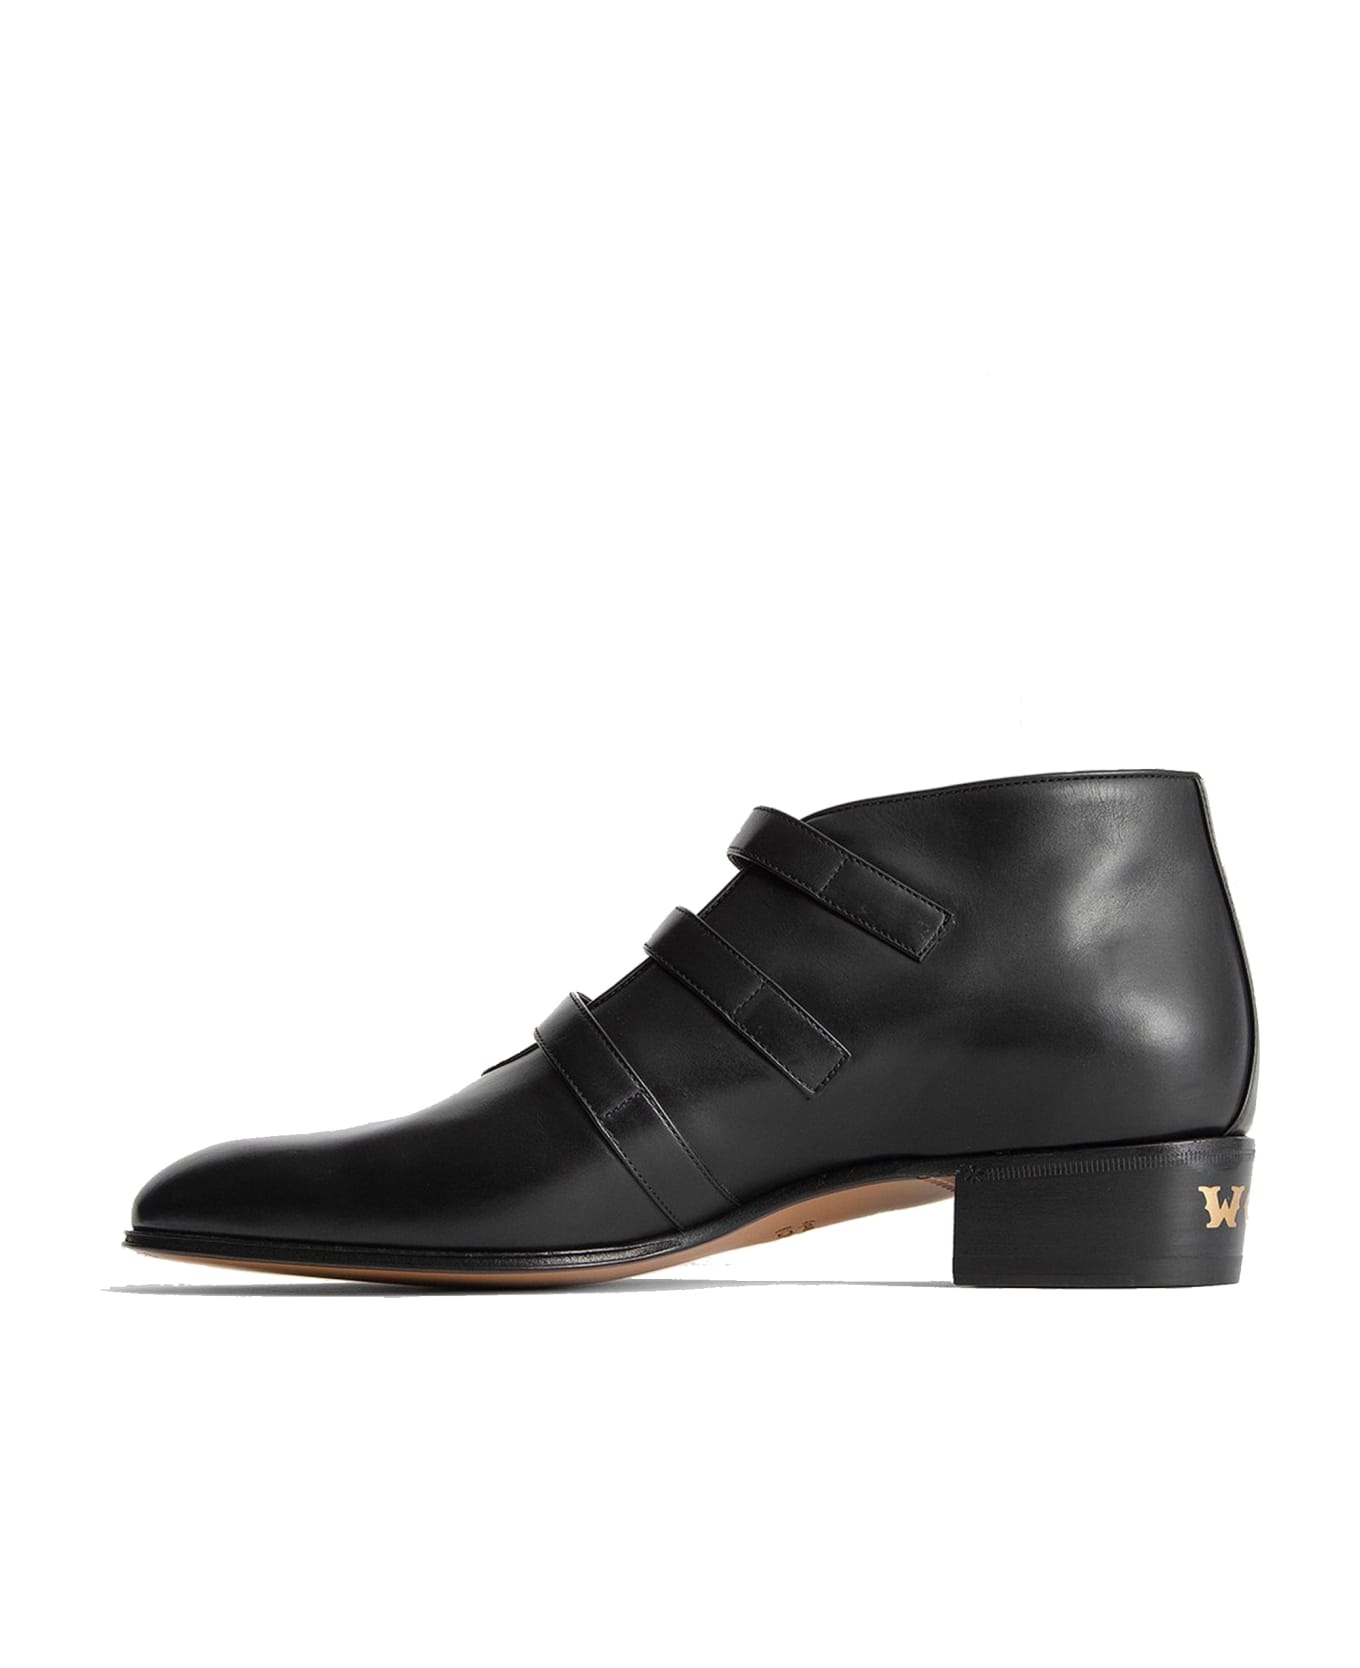 Gucci Leather Ankle Boots - Black ブーツ